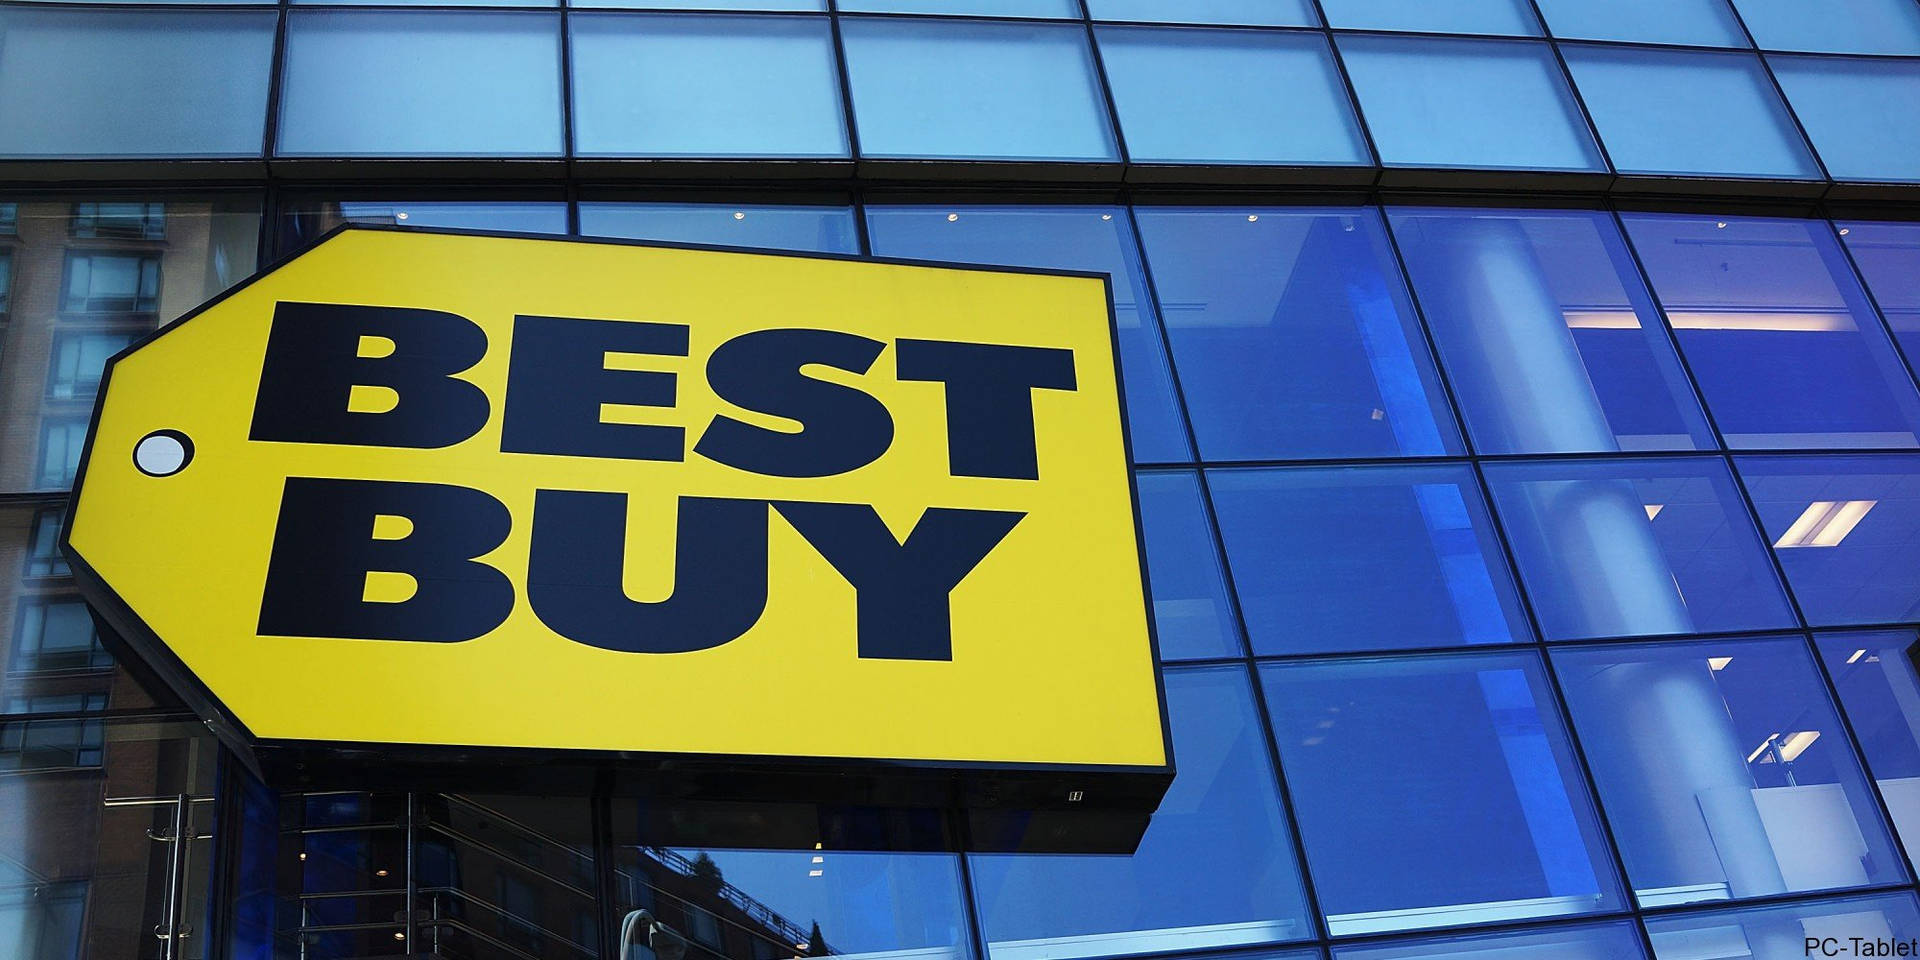 Best Buy Signage On Glass